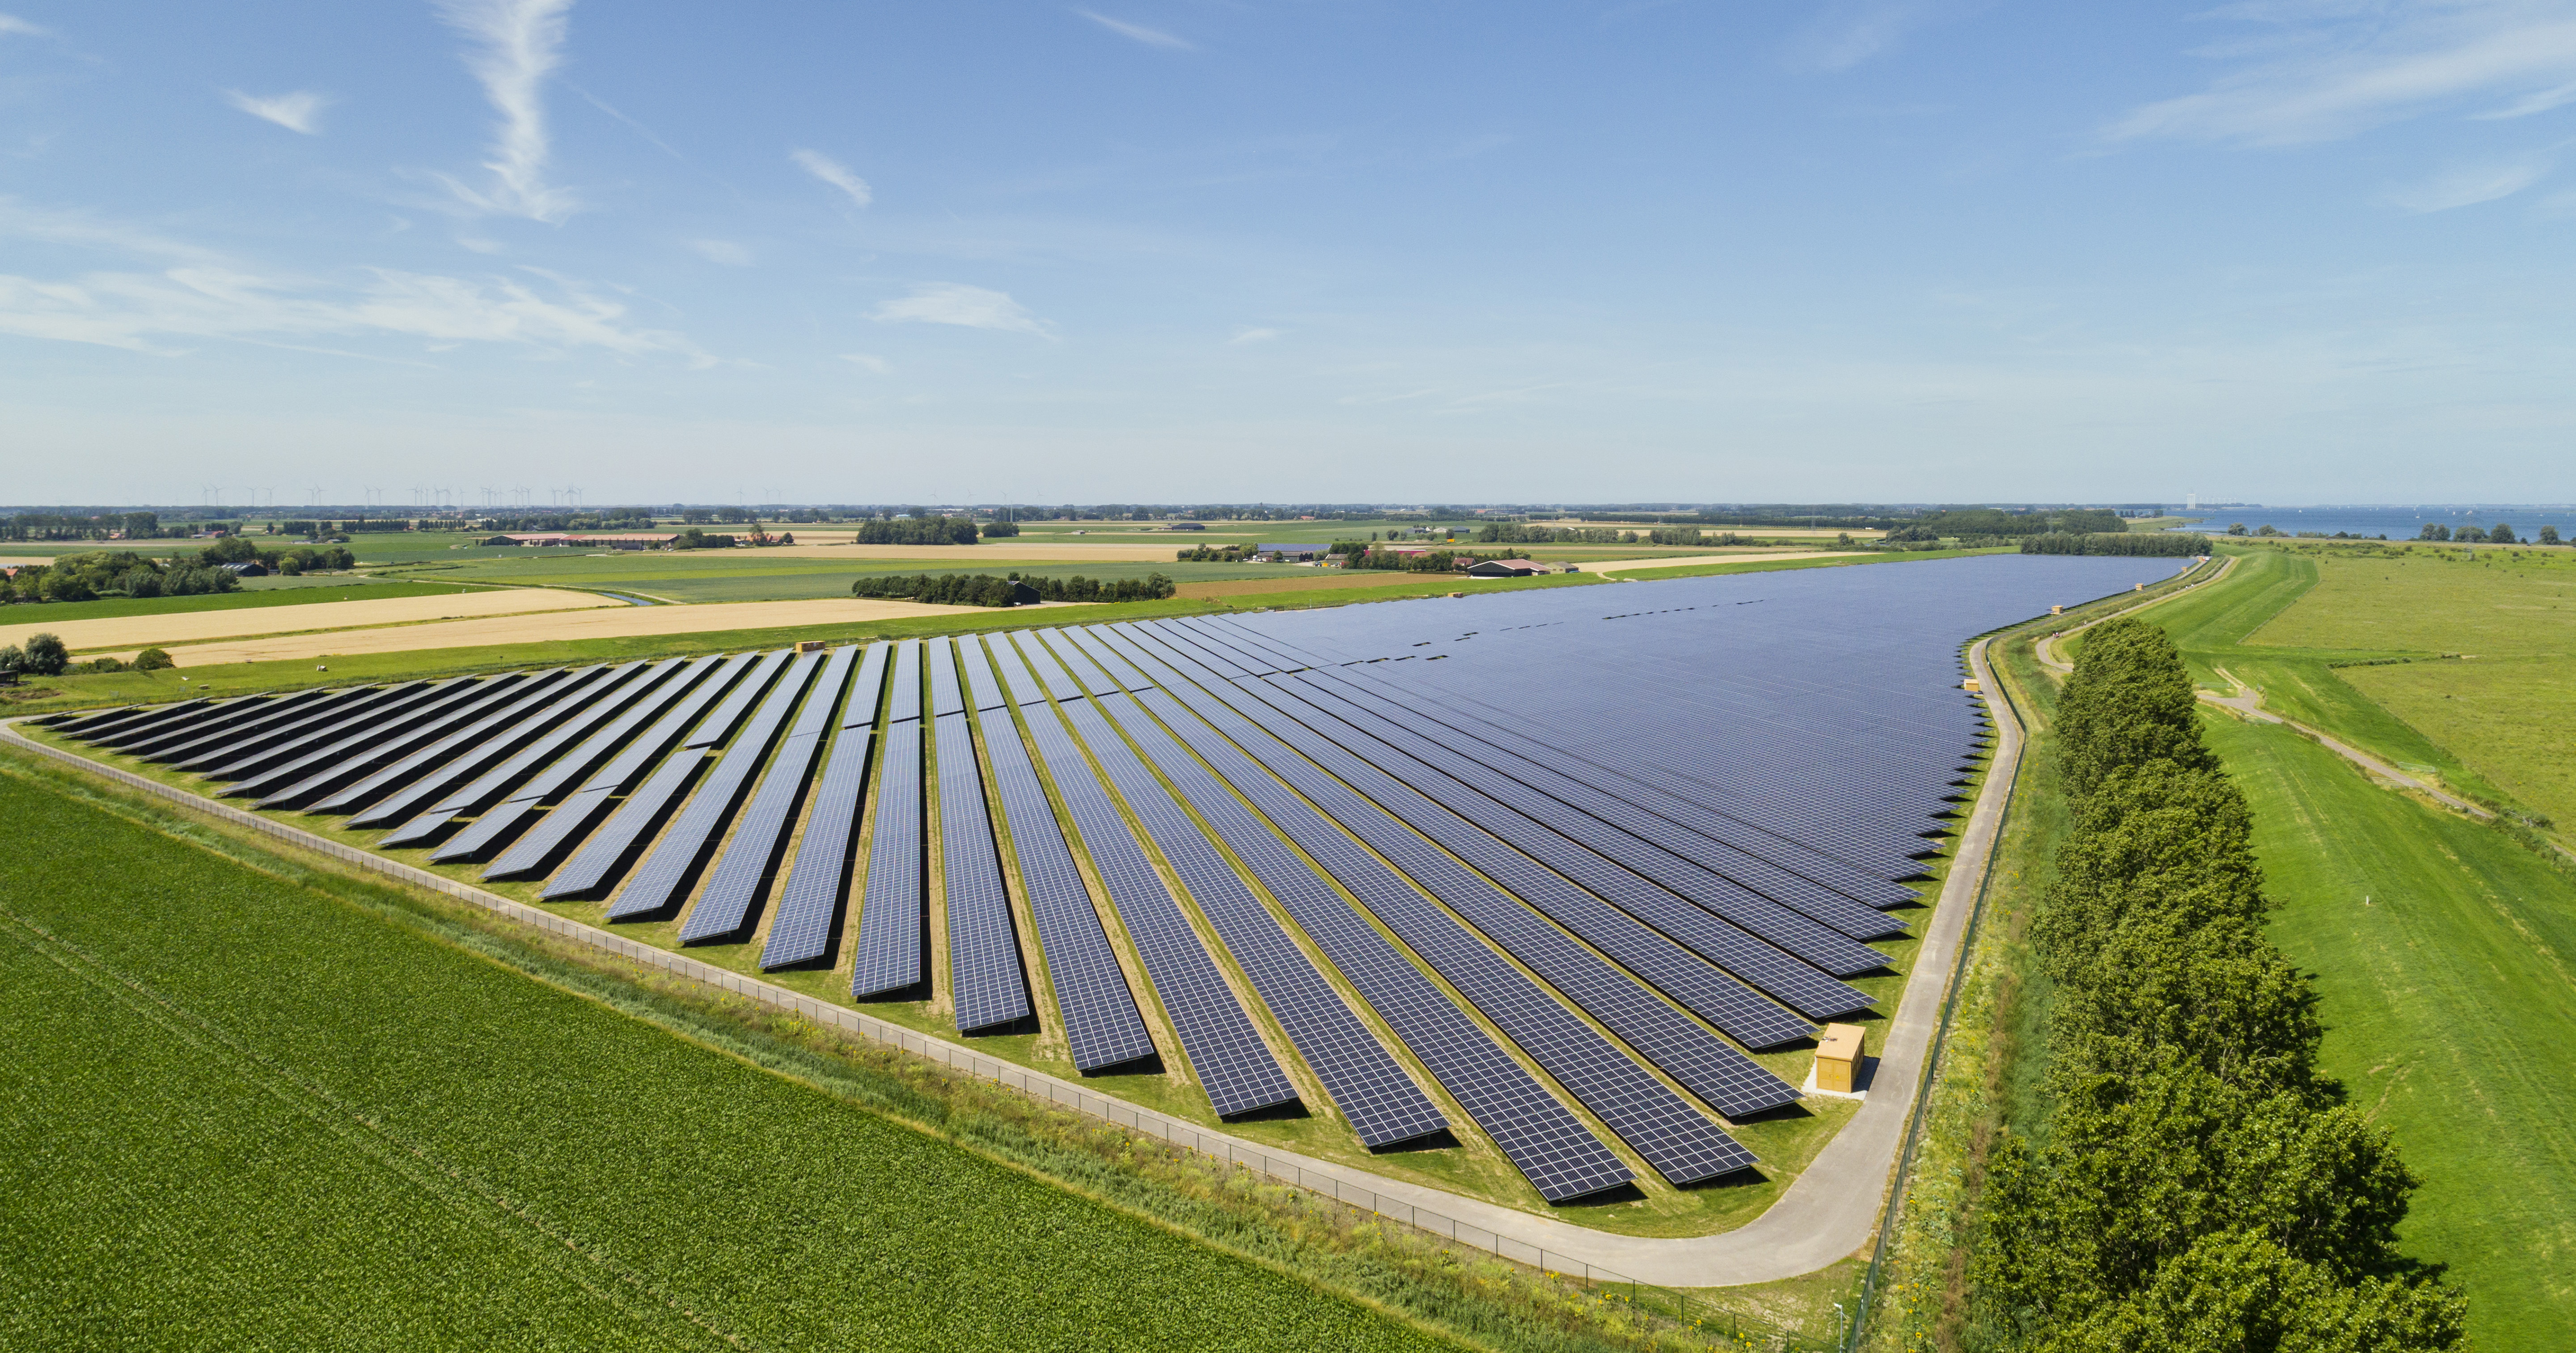 The Netherlands is your partner in tackling water, climate and energy issues